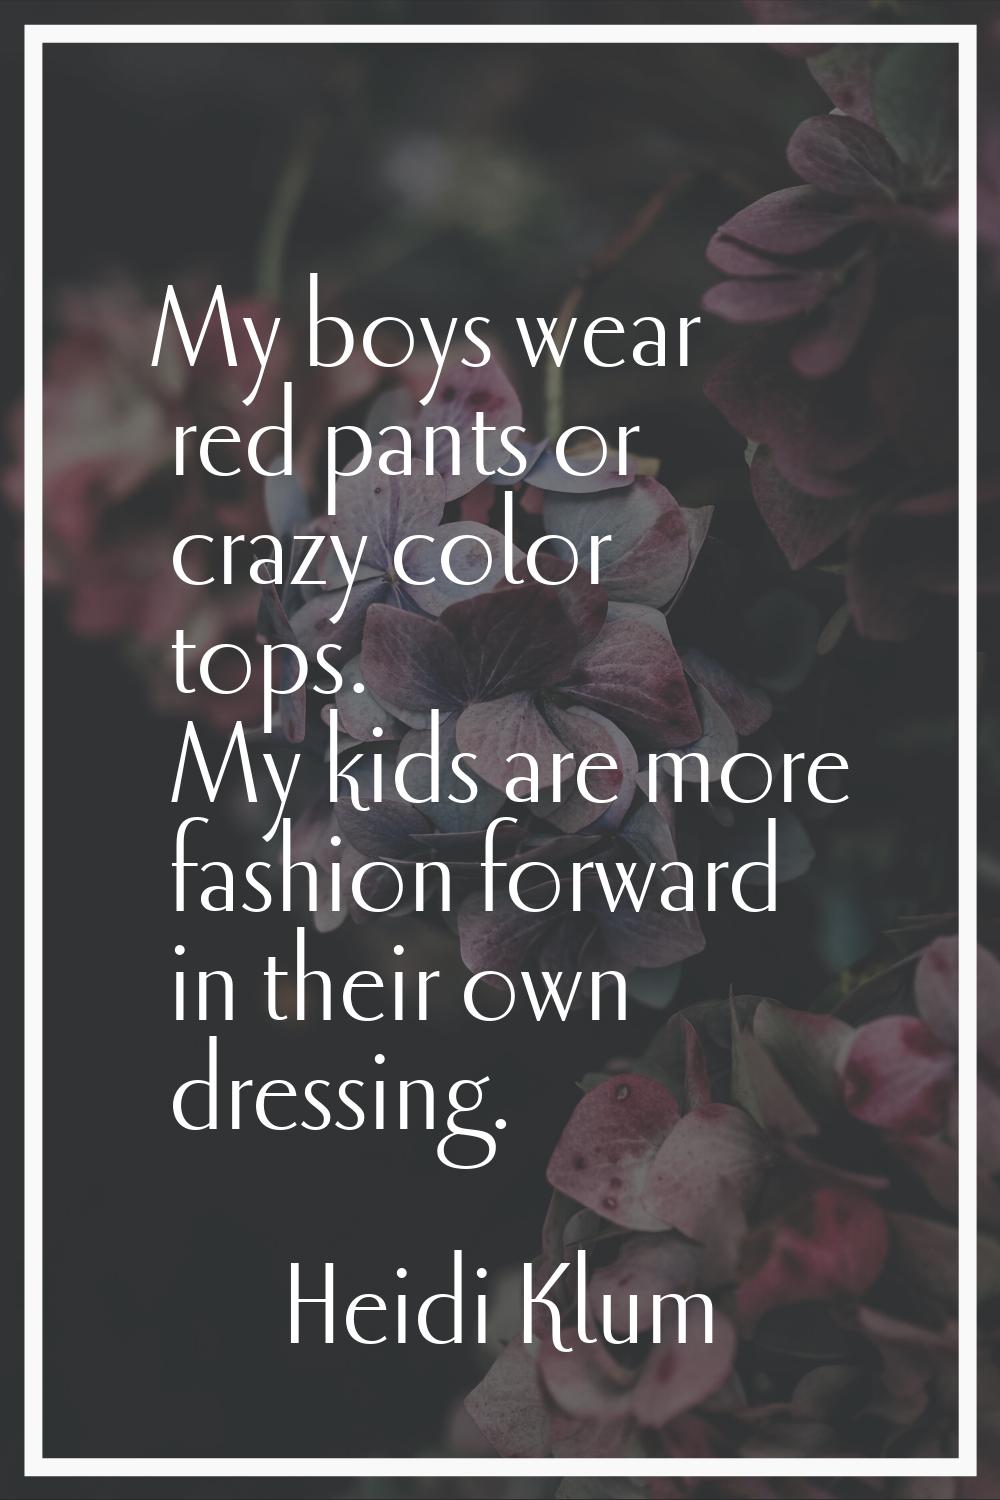 My boys wear red pants or crazy color tops. My kids are more fashion forward in their own dressing.